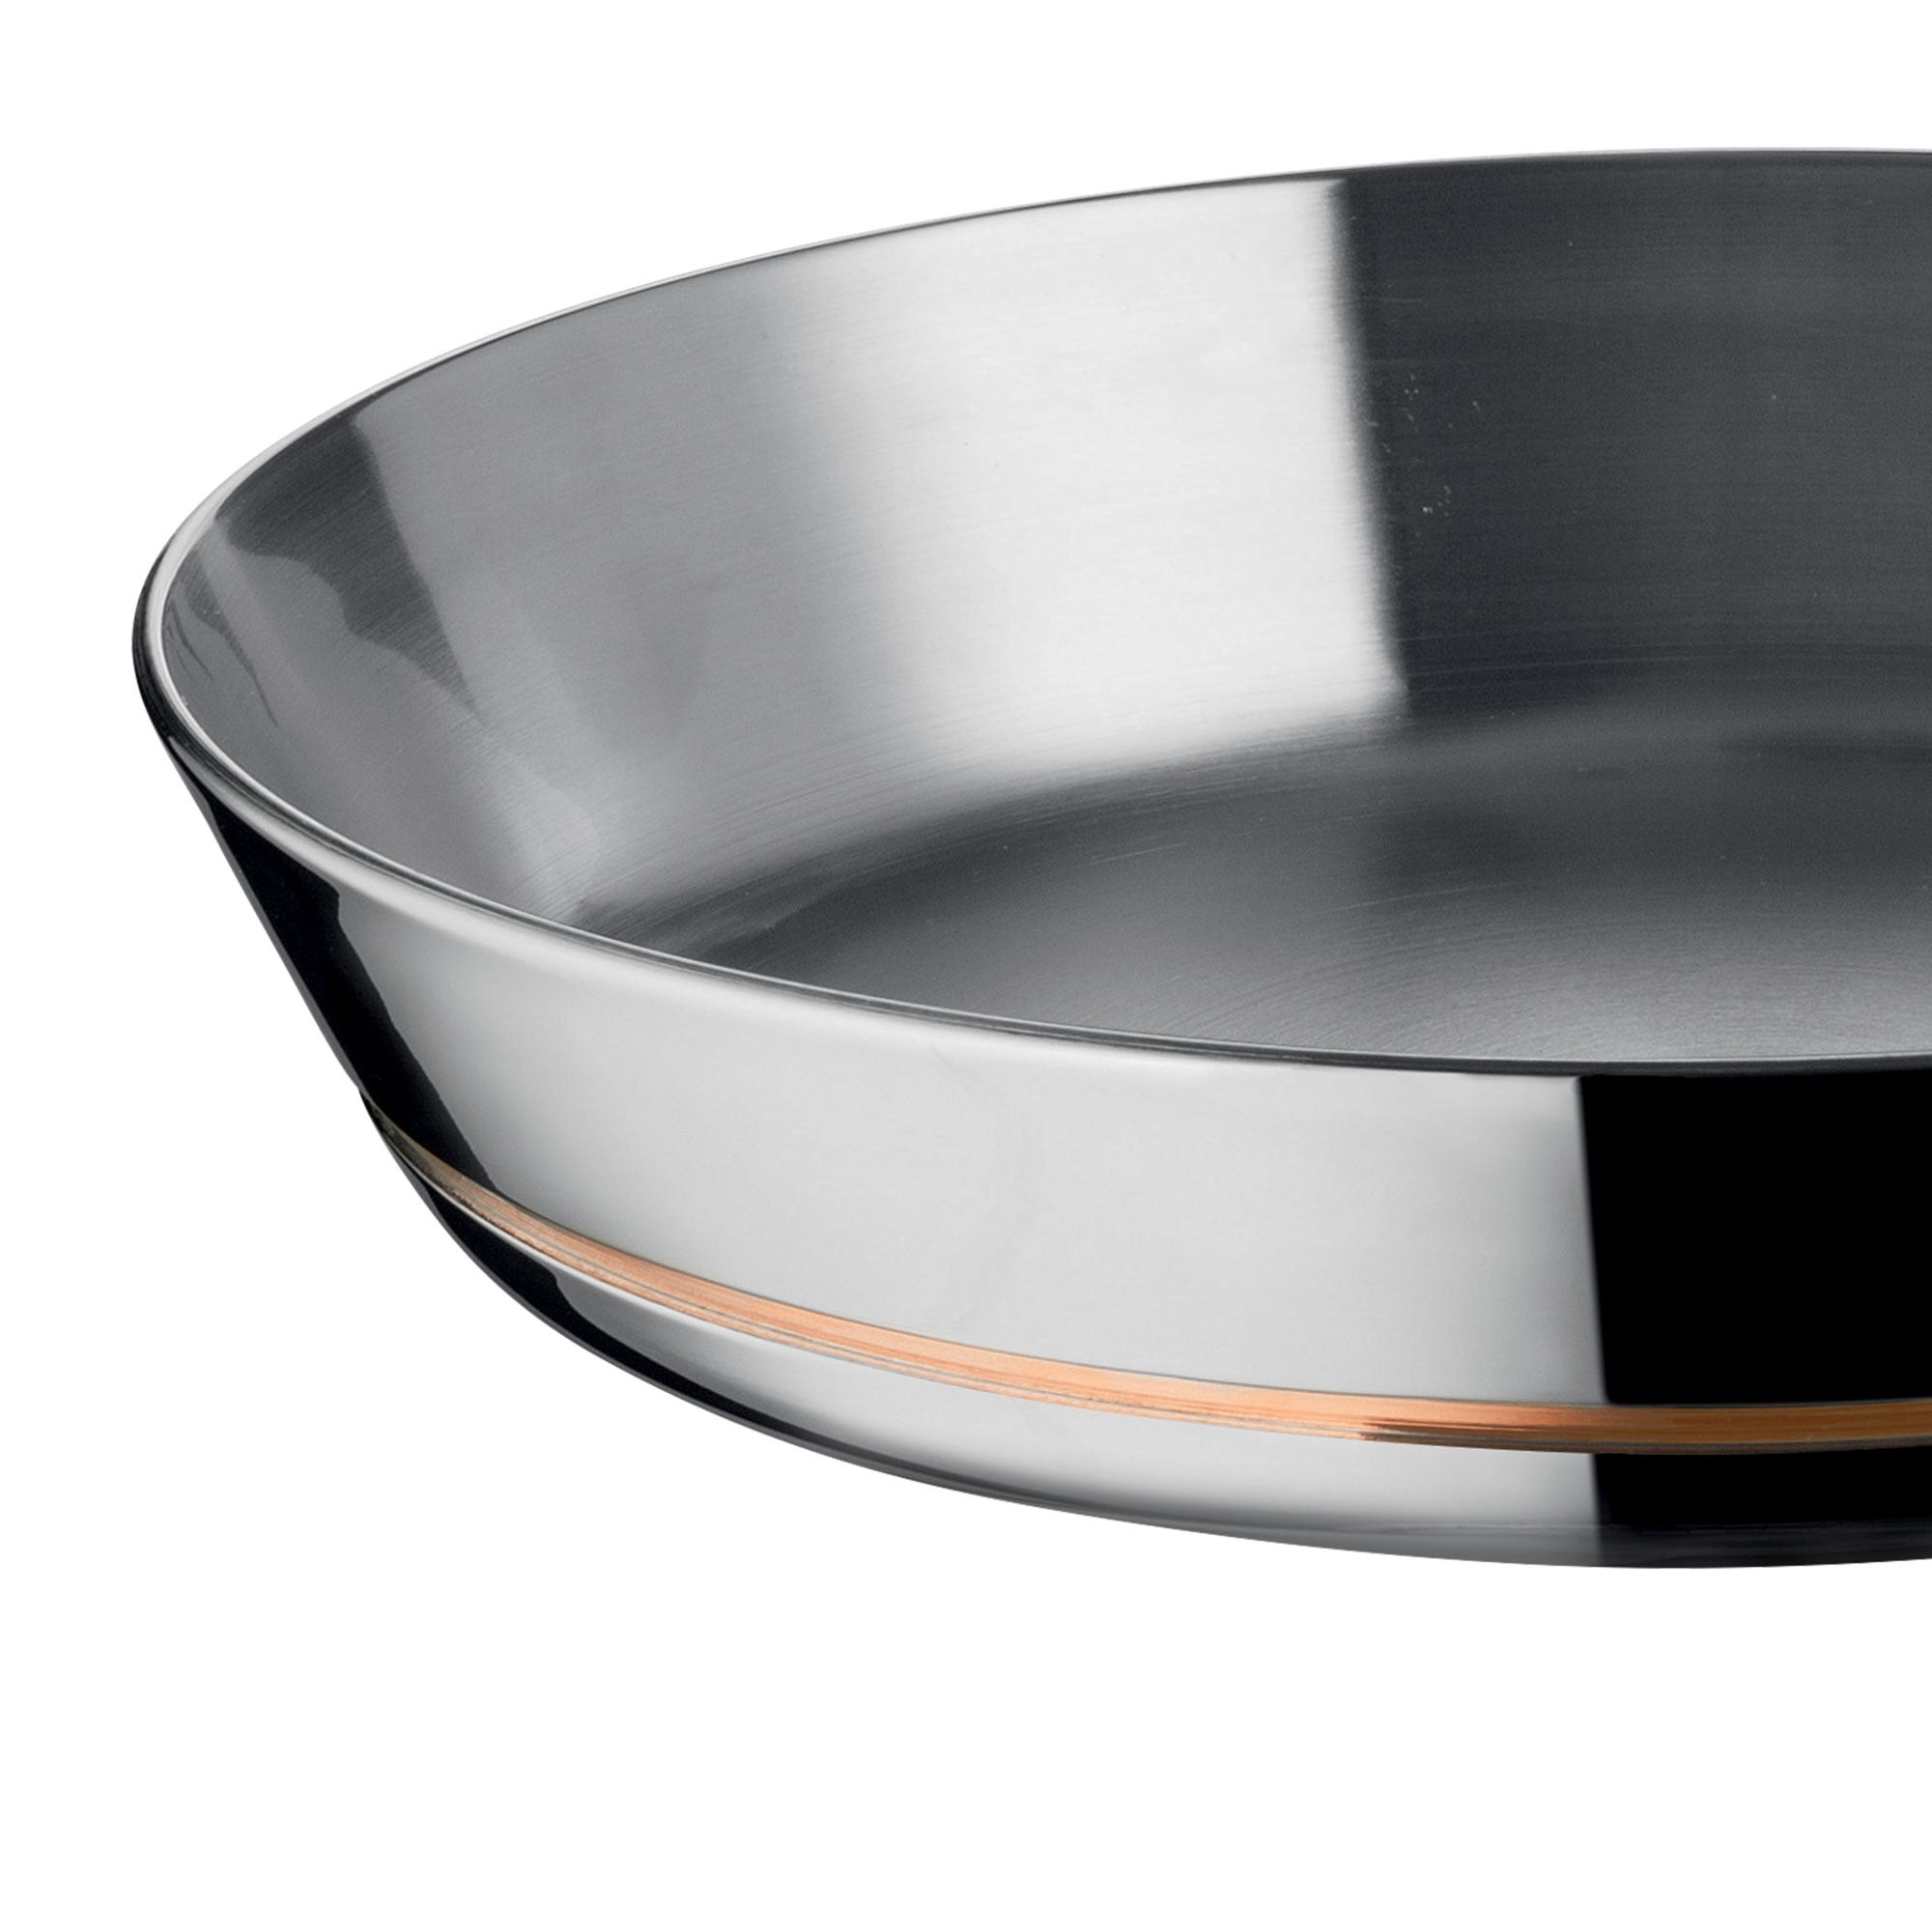 Scanpan Axis Stainless Steel Frypan 26cm Image 2